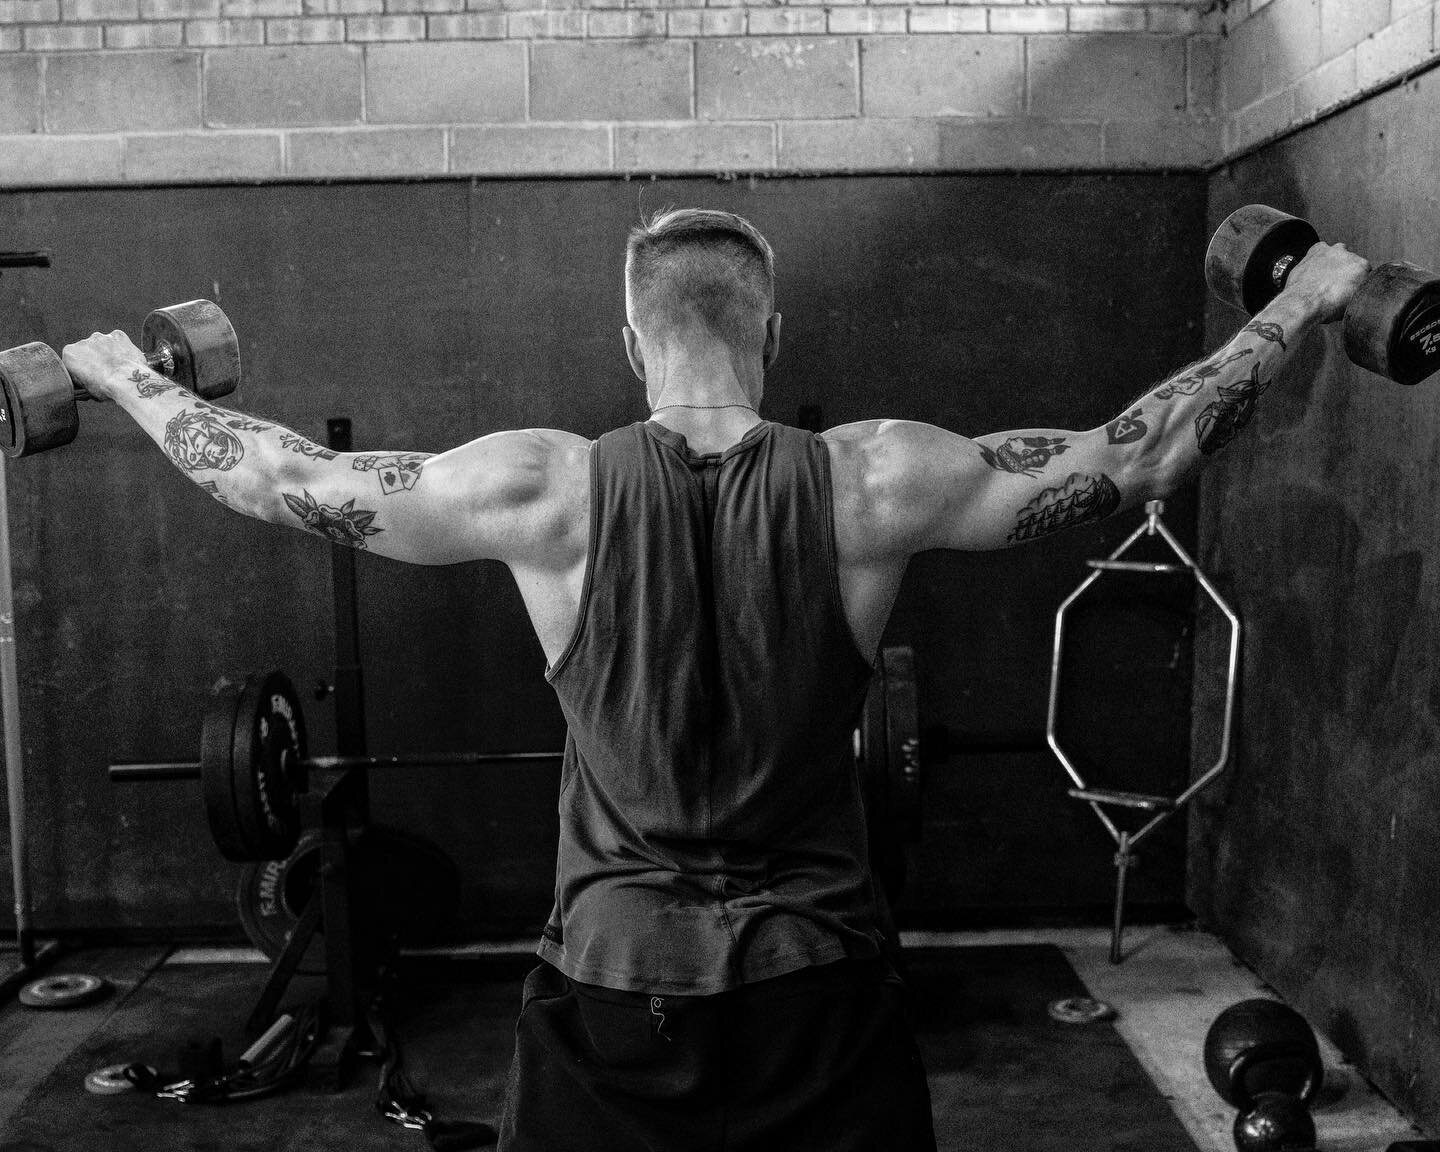 SHOULDERS - The area with the densest number of androgen receptors.

What does this mean?

It means training shoulders increases testosterone levels.

Increased testosterone levels lead to bigger shoulders.

An anabolic circle if you will.

Which is 